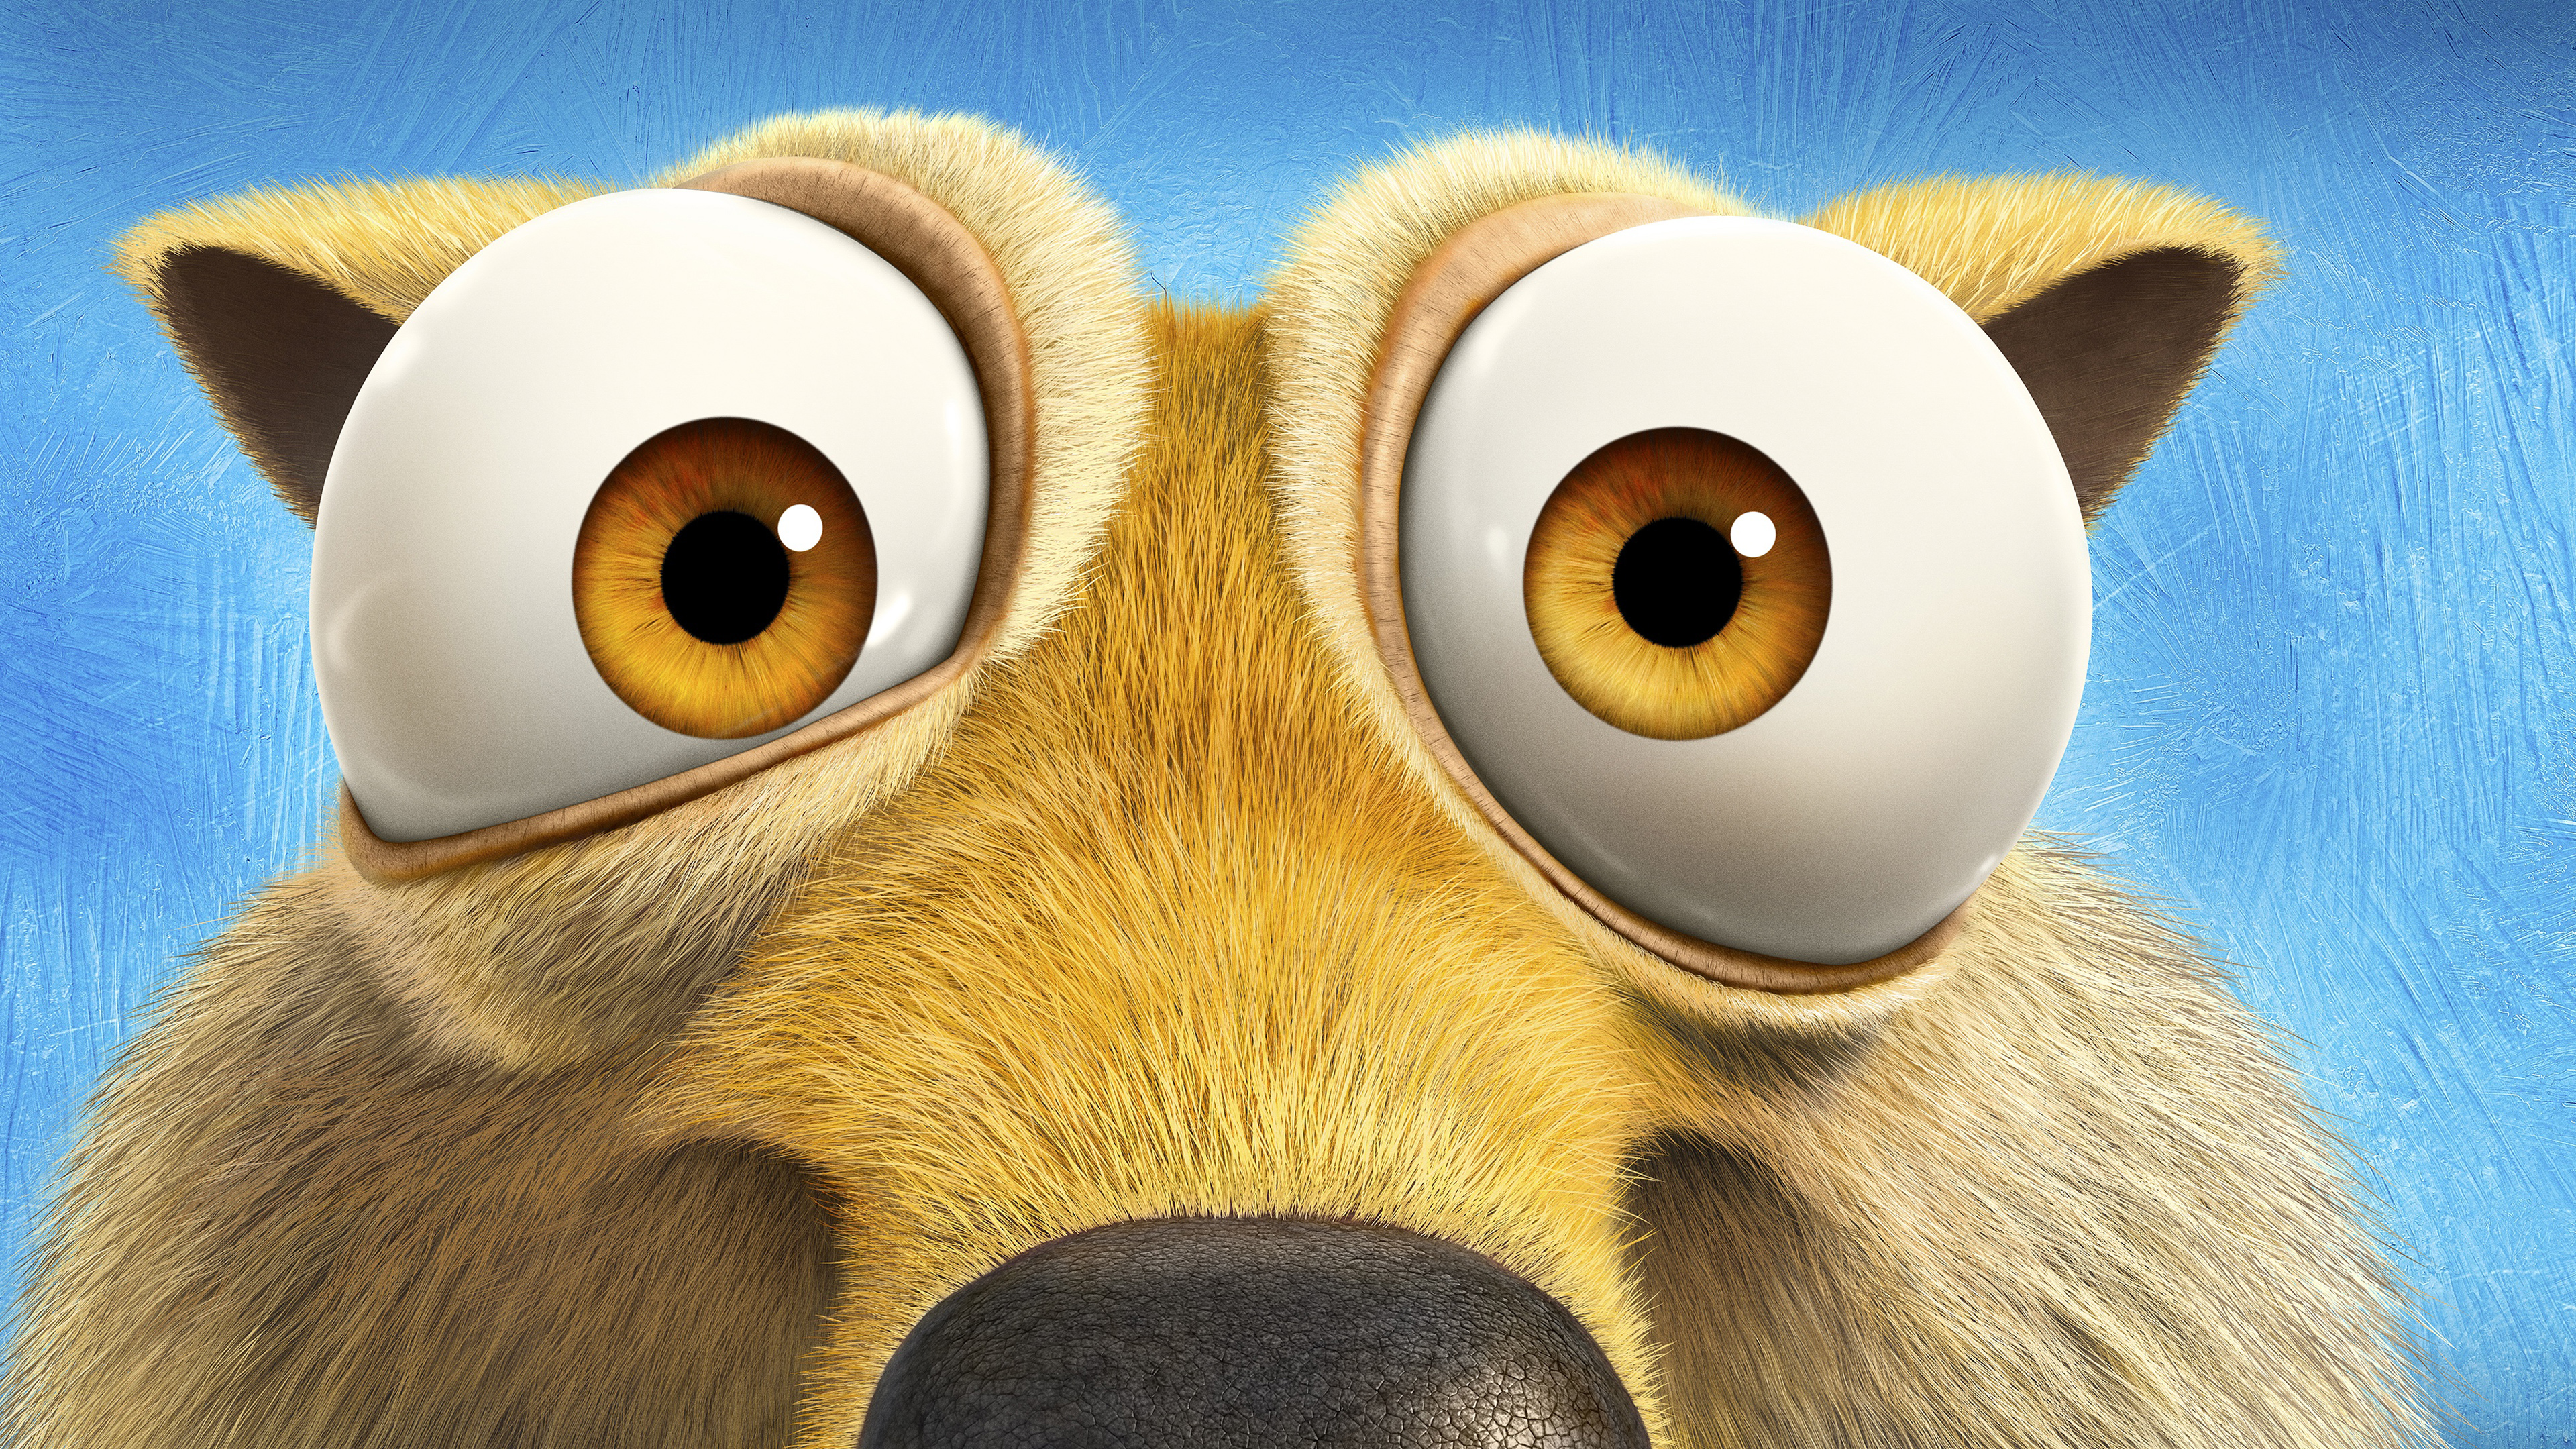 Wallpaper ID 606437  Ice Age 1080P Scrat Ice Age free download